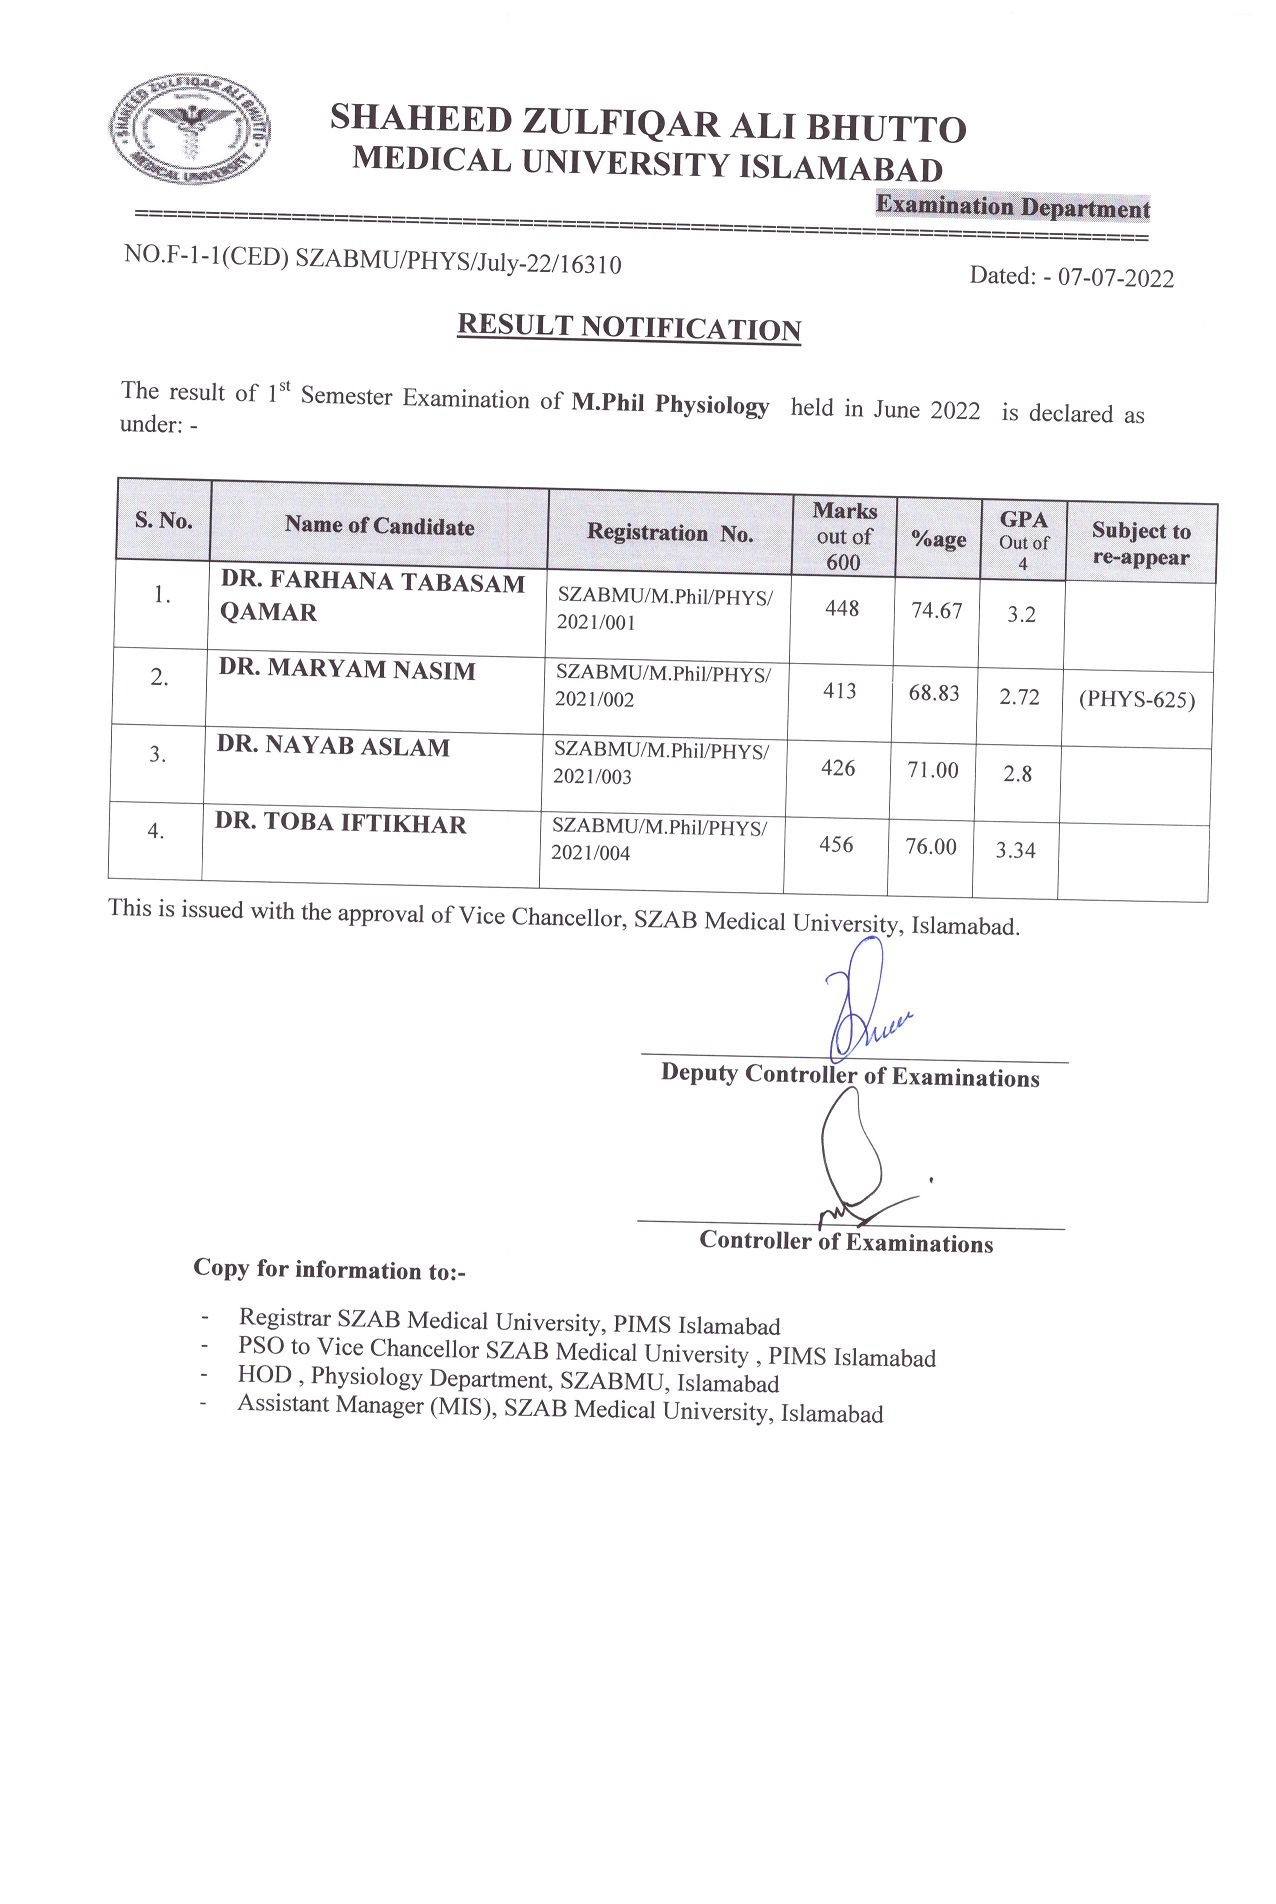 Result Notification of M.Phil Physiology (1st Semester) Examination 2022